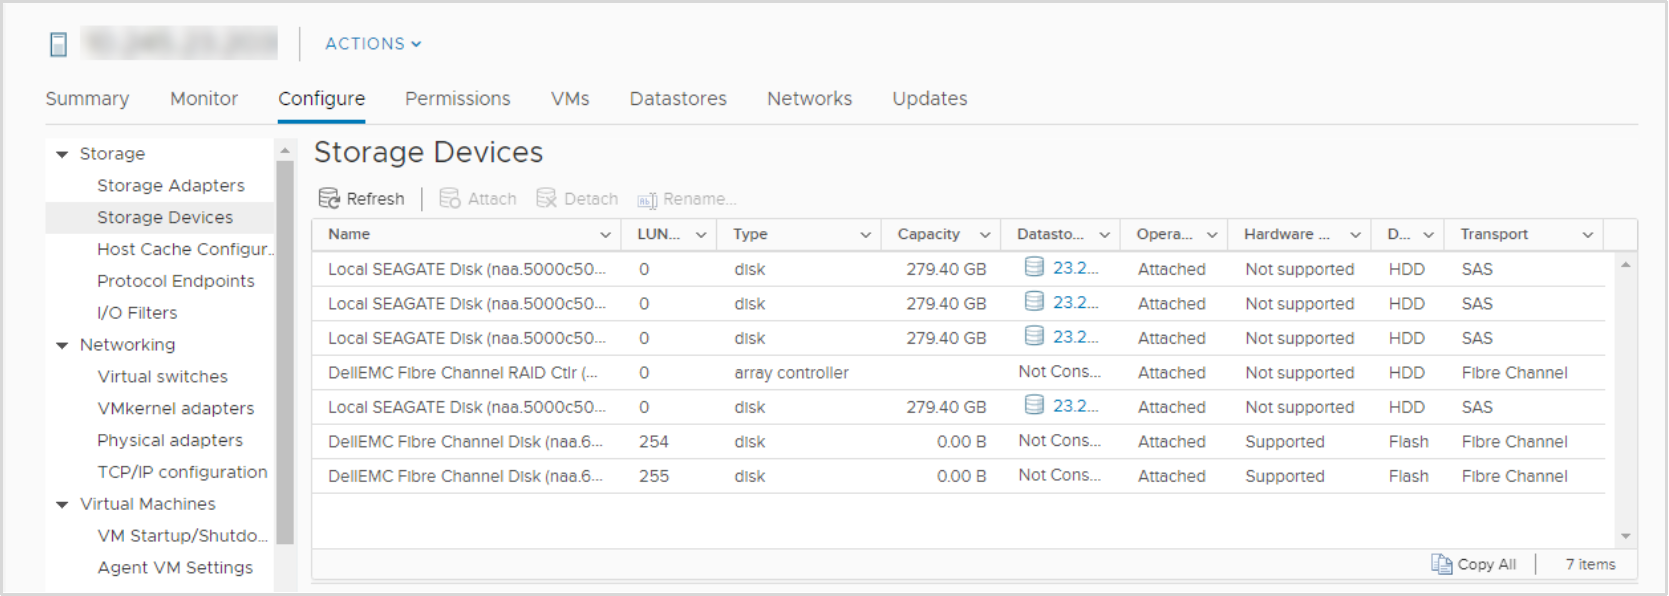 A screenshot of vCenter showing the Storage Devices page, including the two protocol endpoints with LUN IDs 254 and 255.